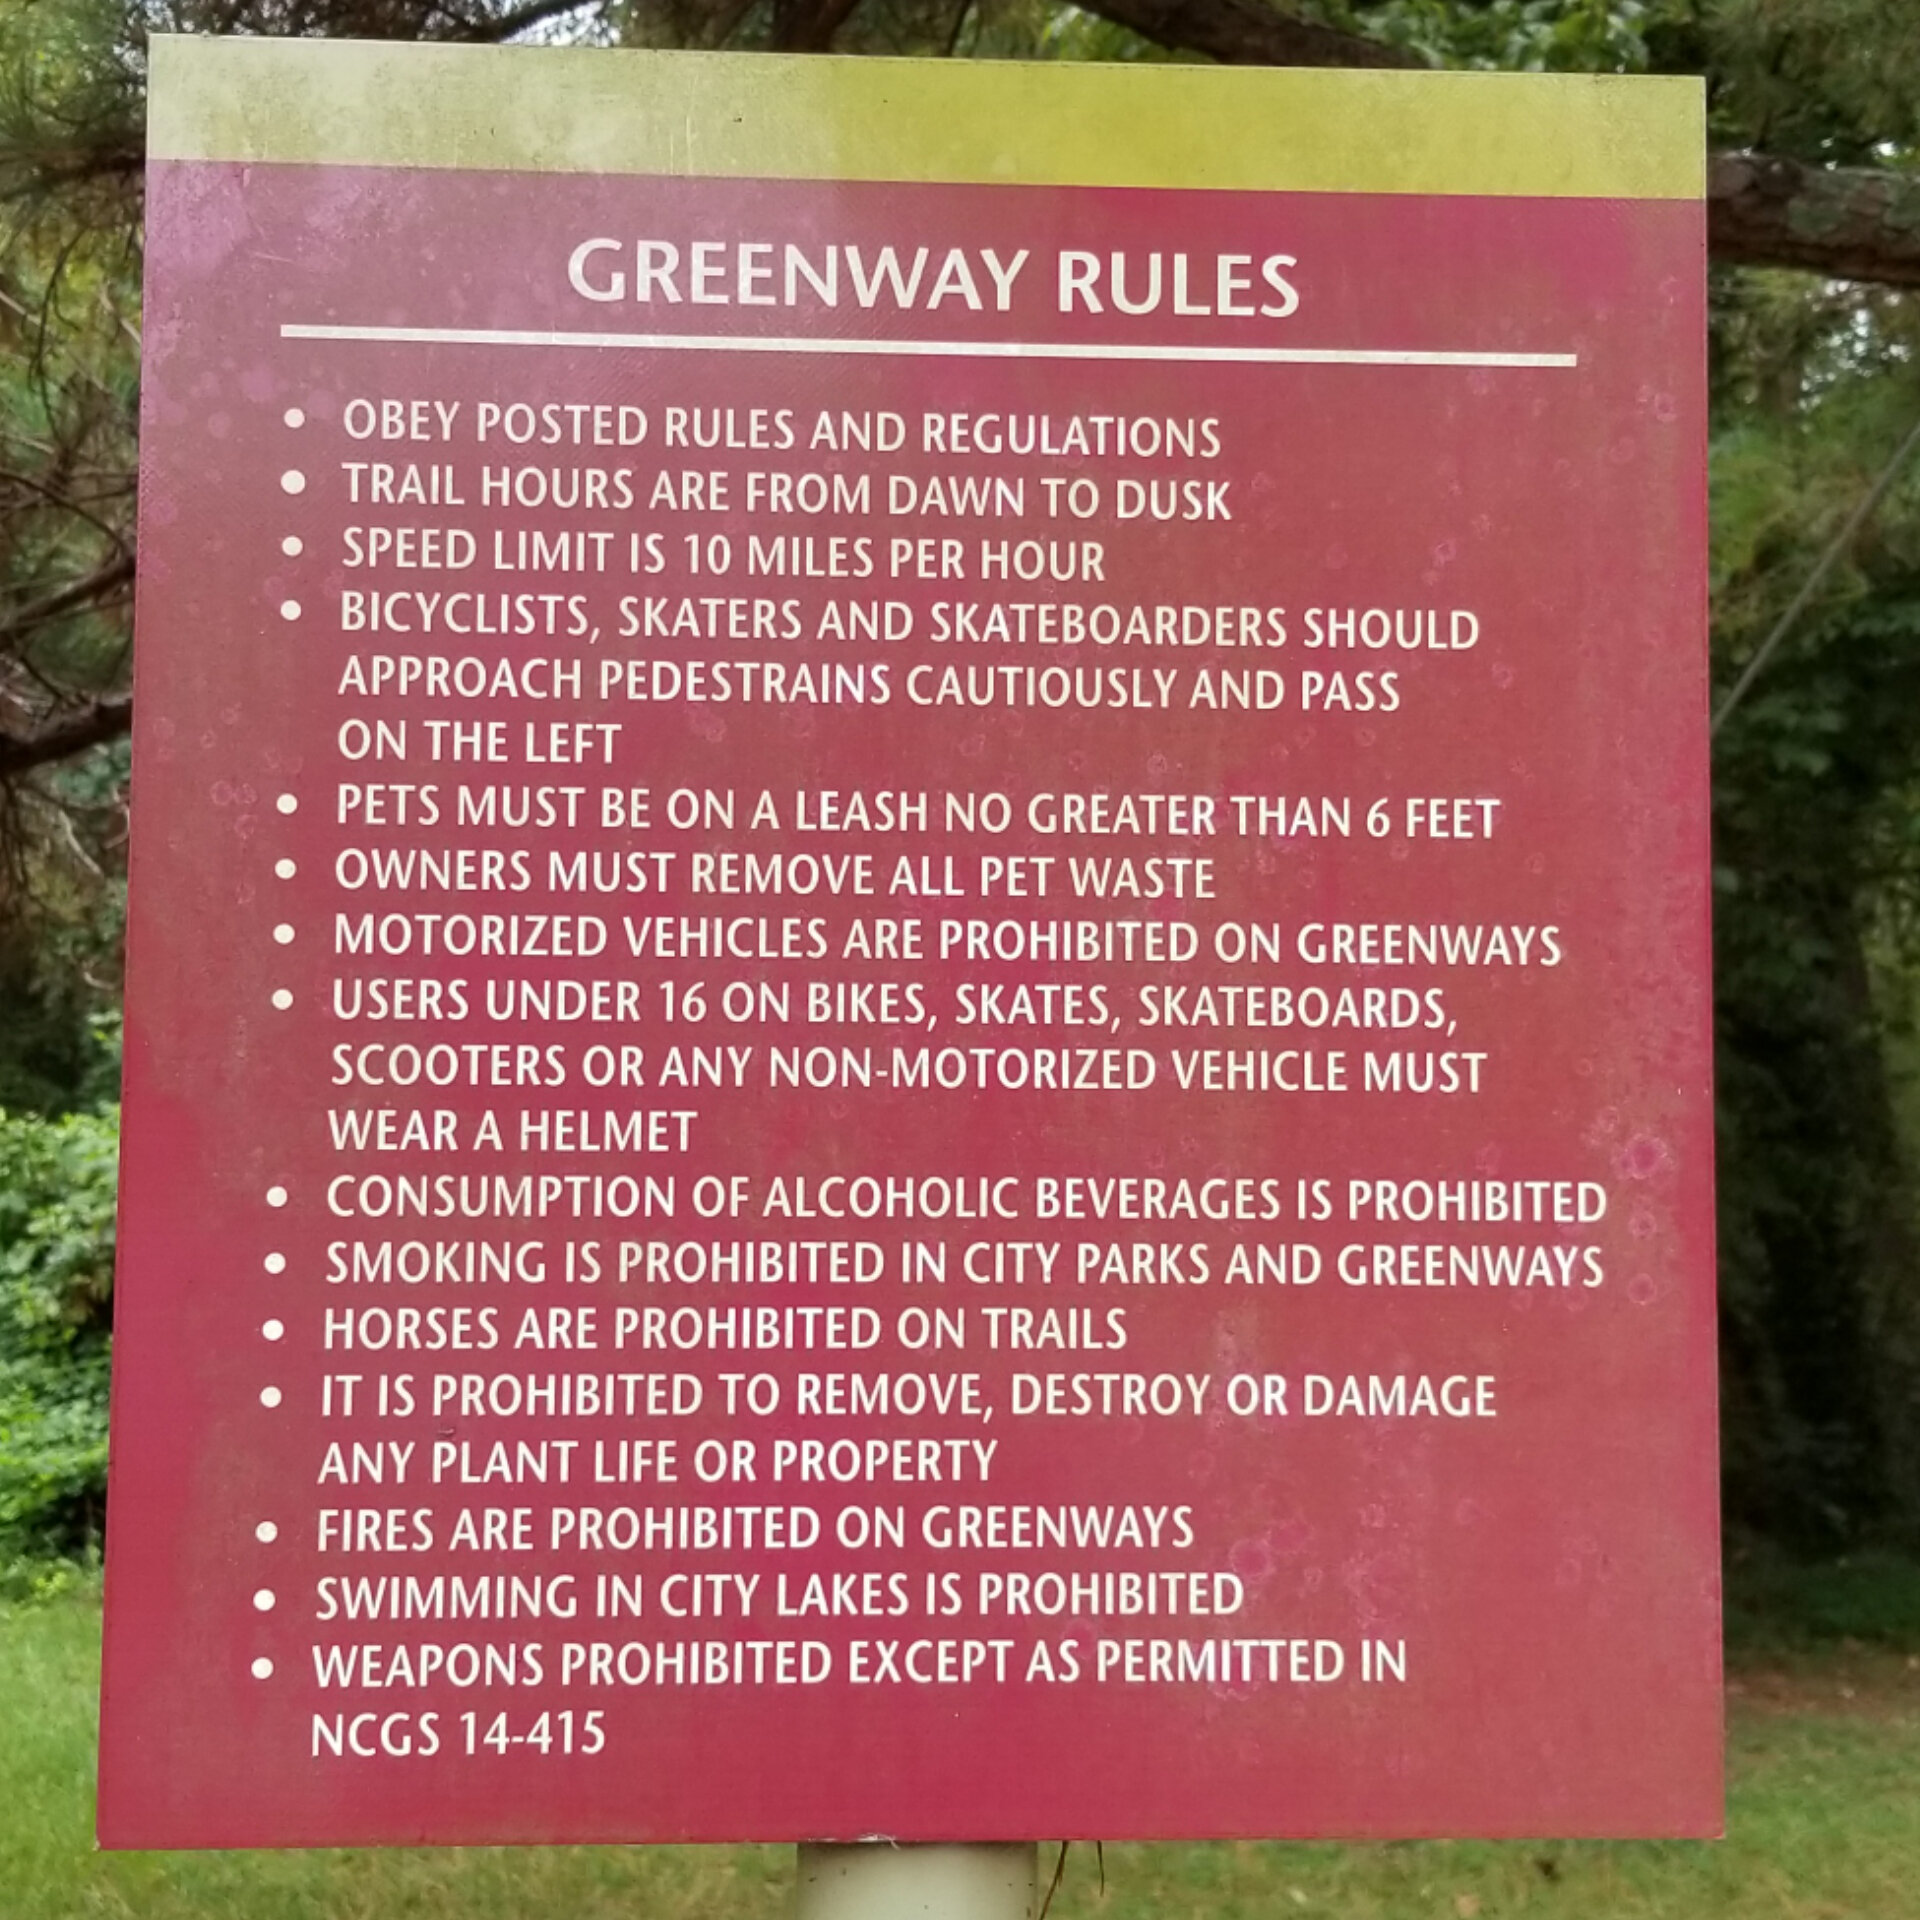 even on the greenway, rules are rules!